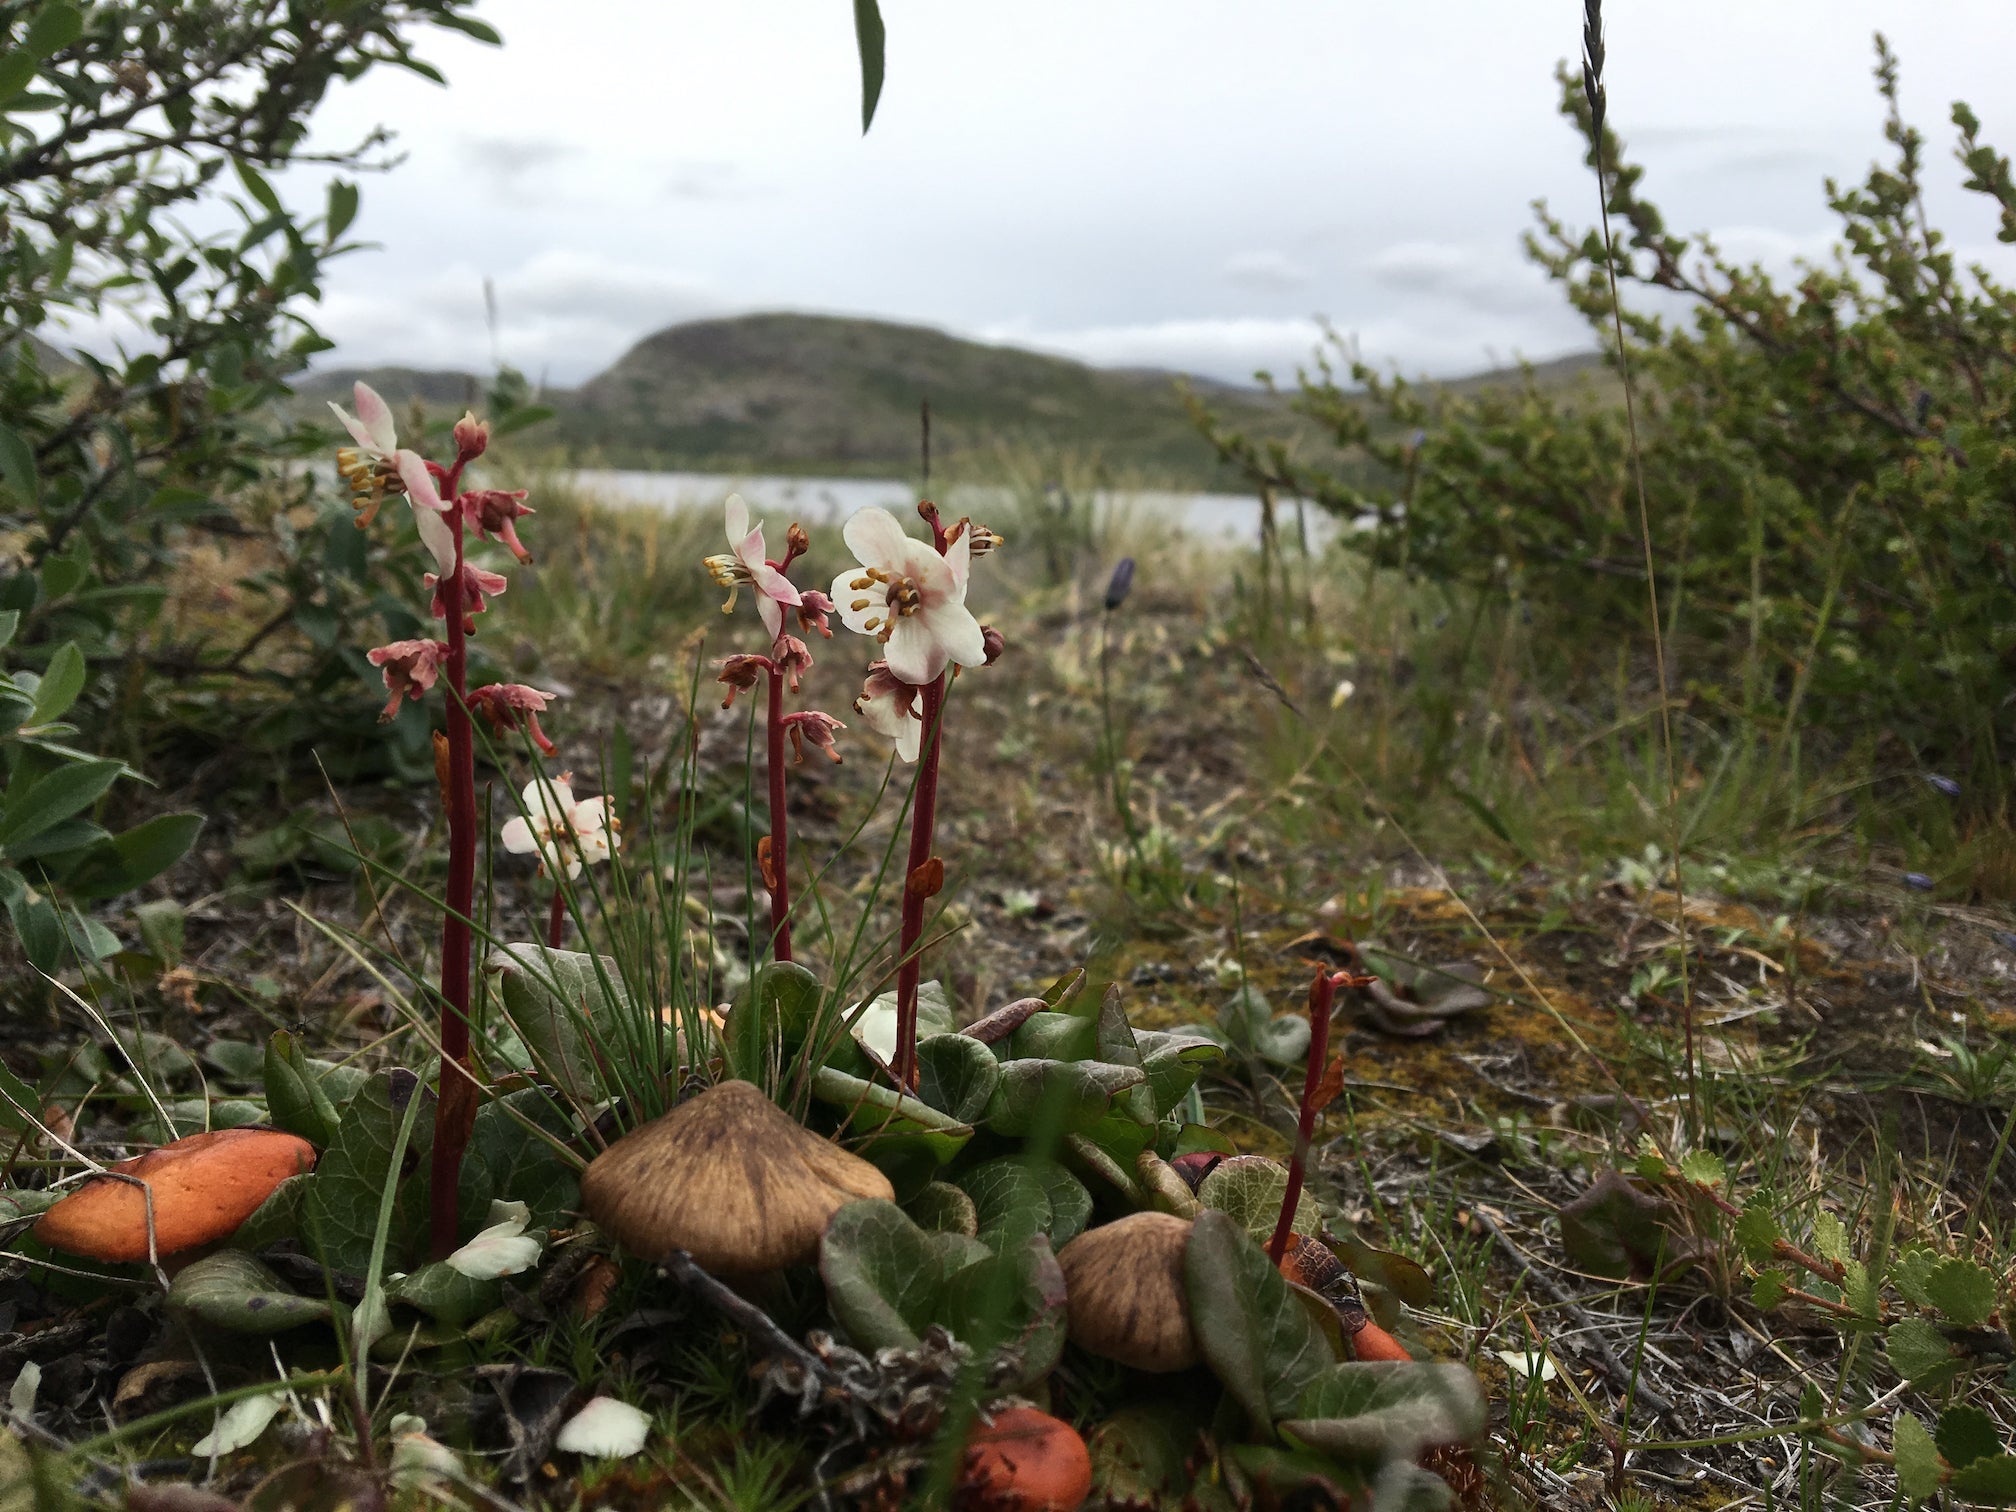 Arctic wintergreen plant grows among birch and willow shrubs in foreground, in Greenland 